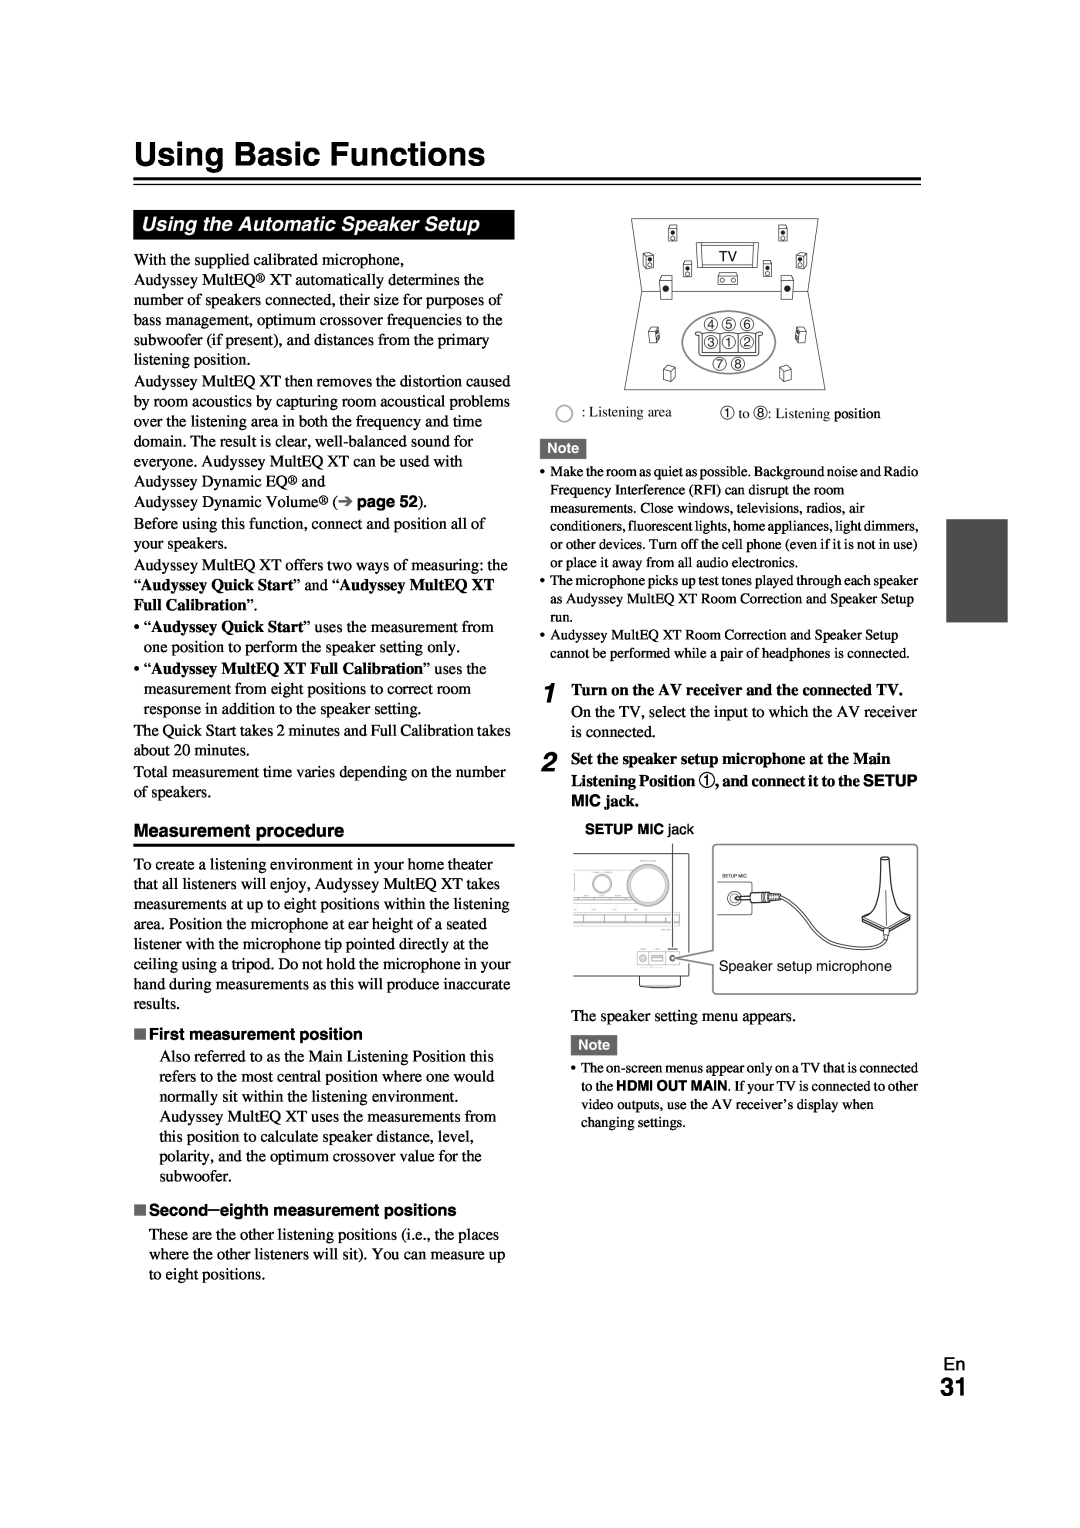 Onkyo TX-NR709 instruction manual Using Basic Functions, Using the Automatic Speaker Setup, First measurement position 